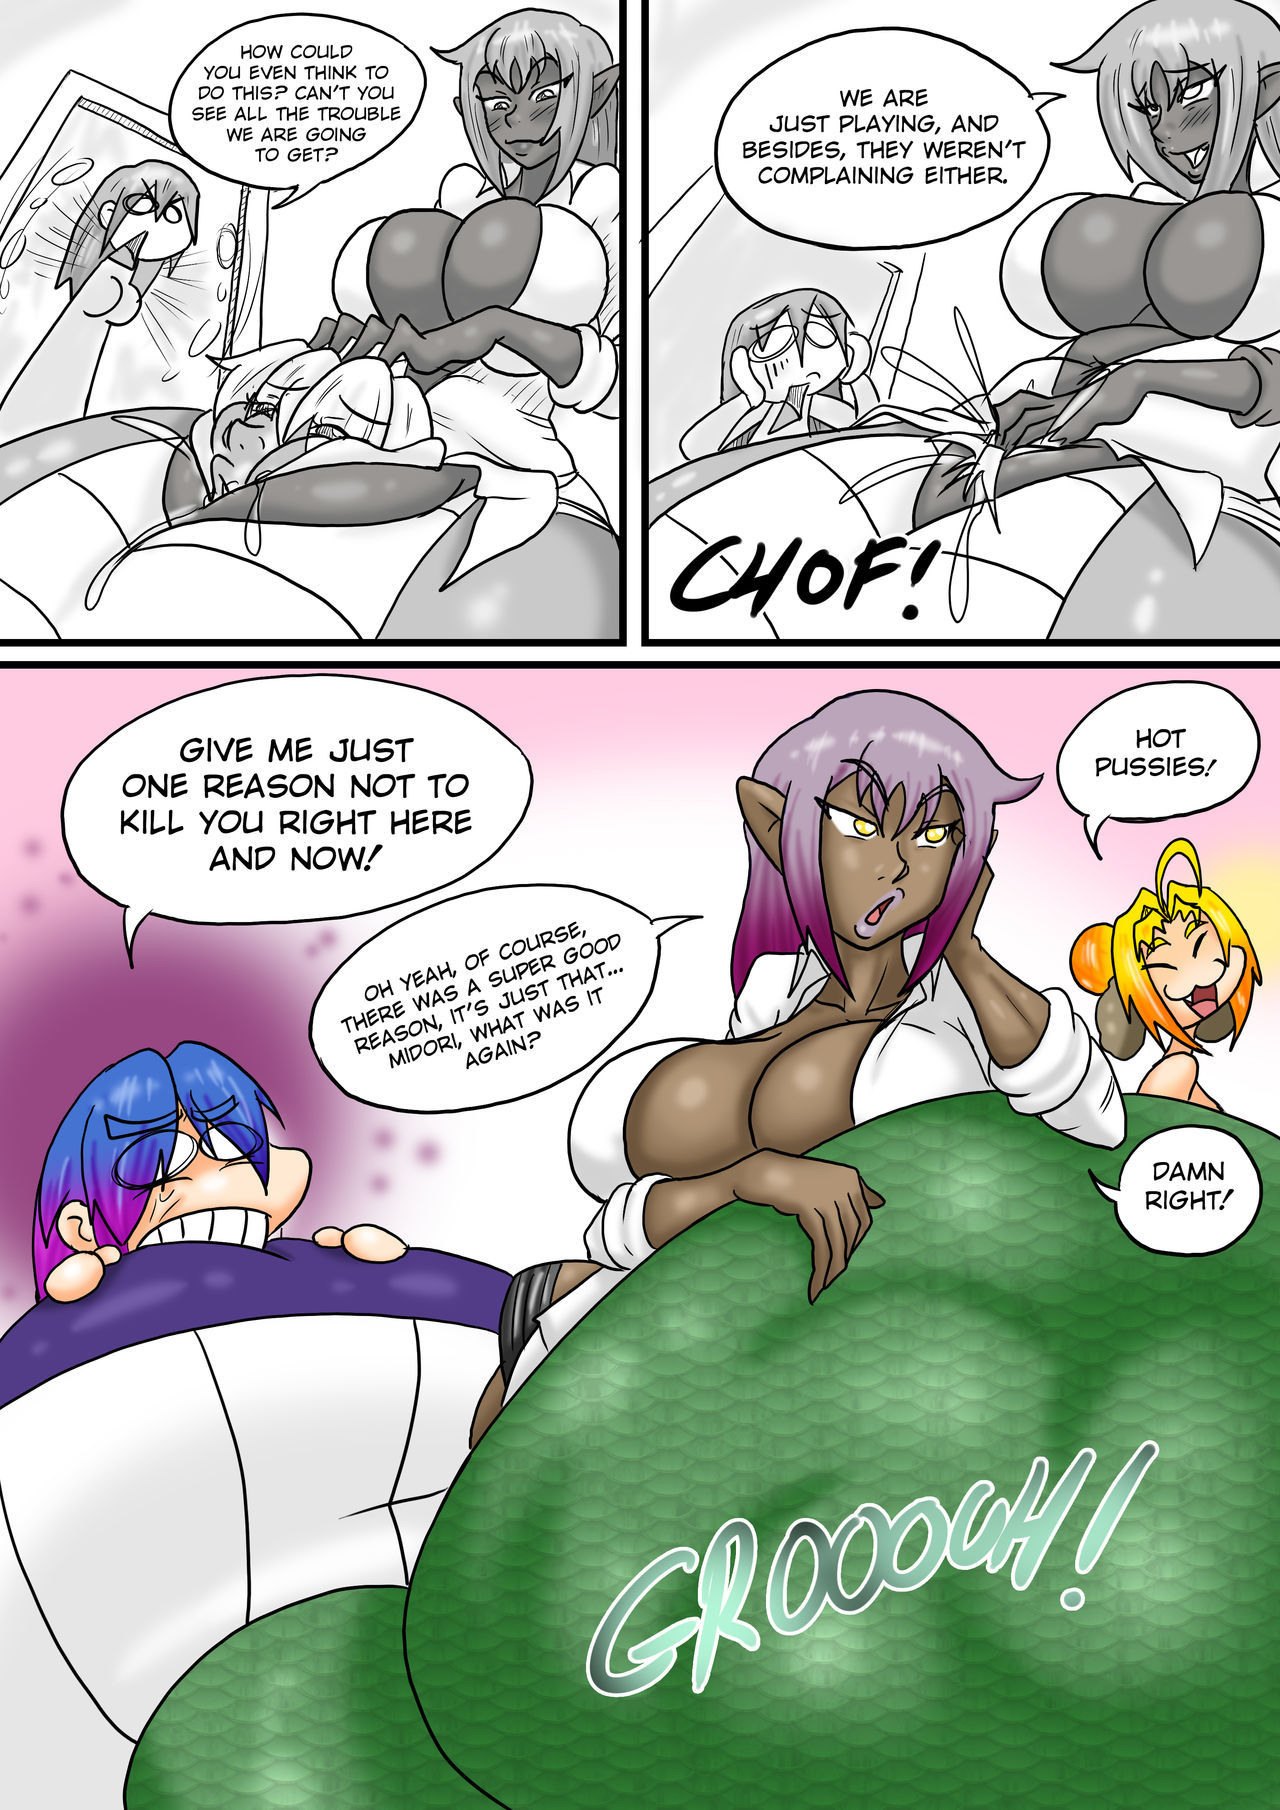 Nagas Story 3, The Vore Club by Natsumemetalsonic page 6